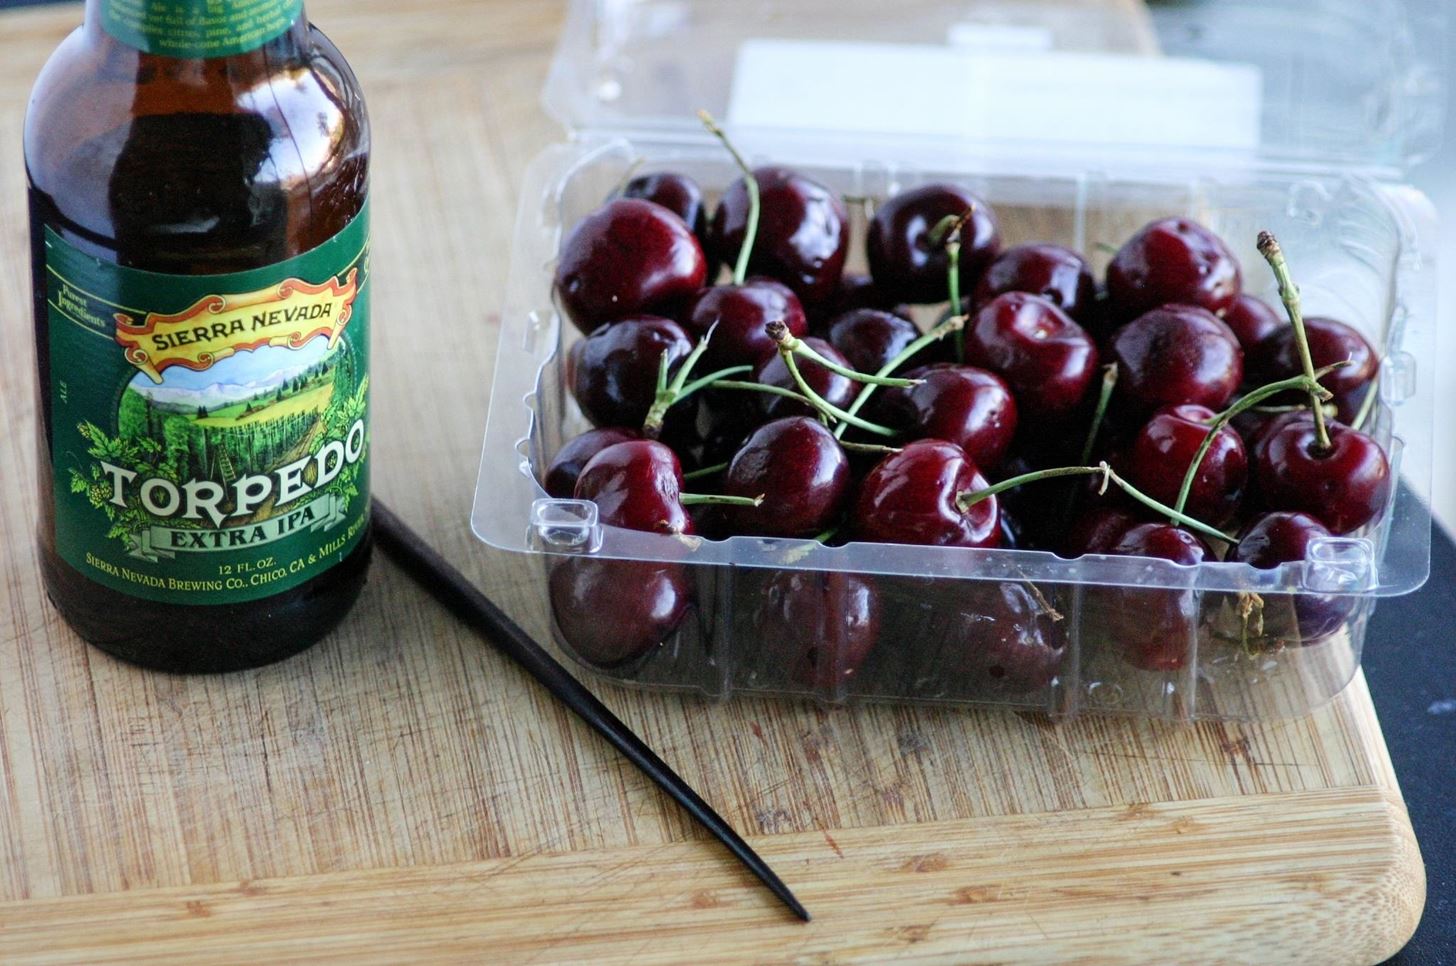 Pit Cherries in a Snap with Zero Mess & No Special Tools